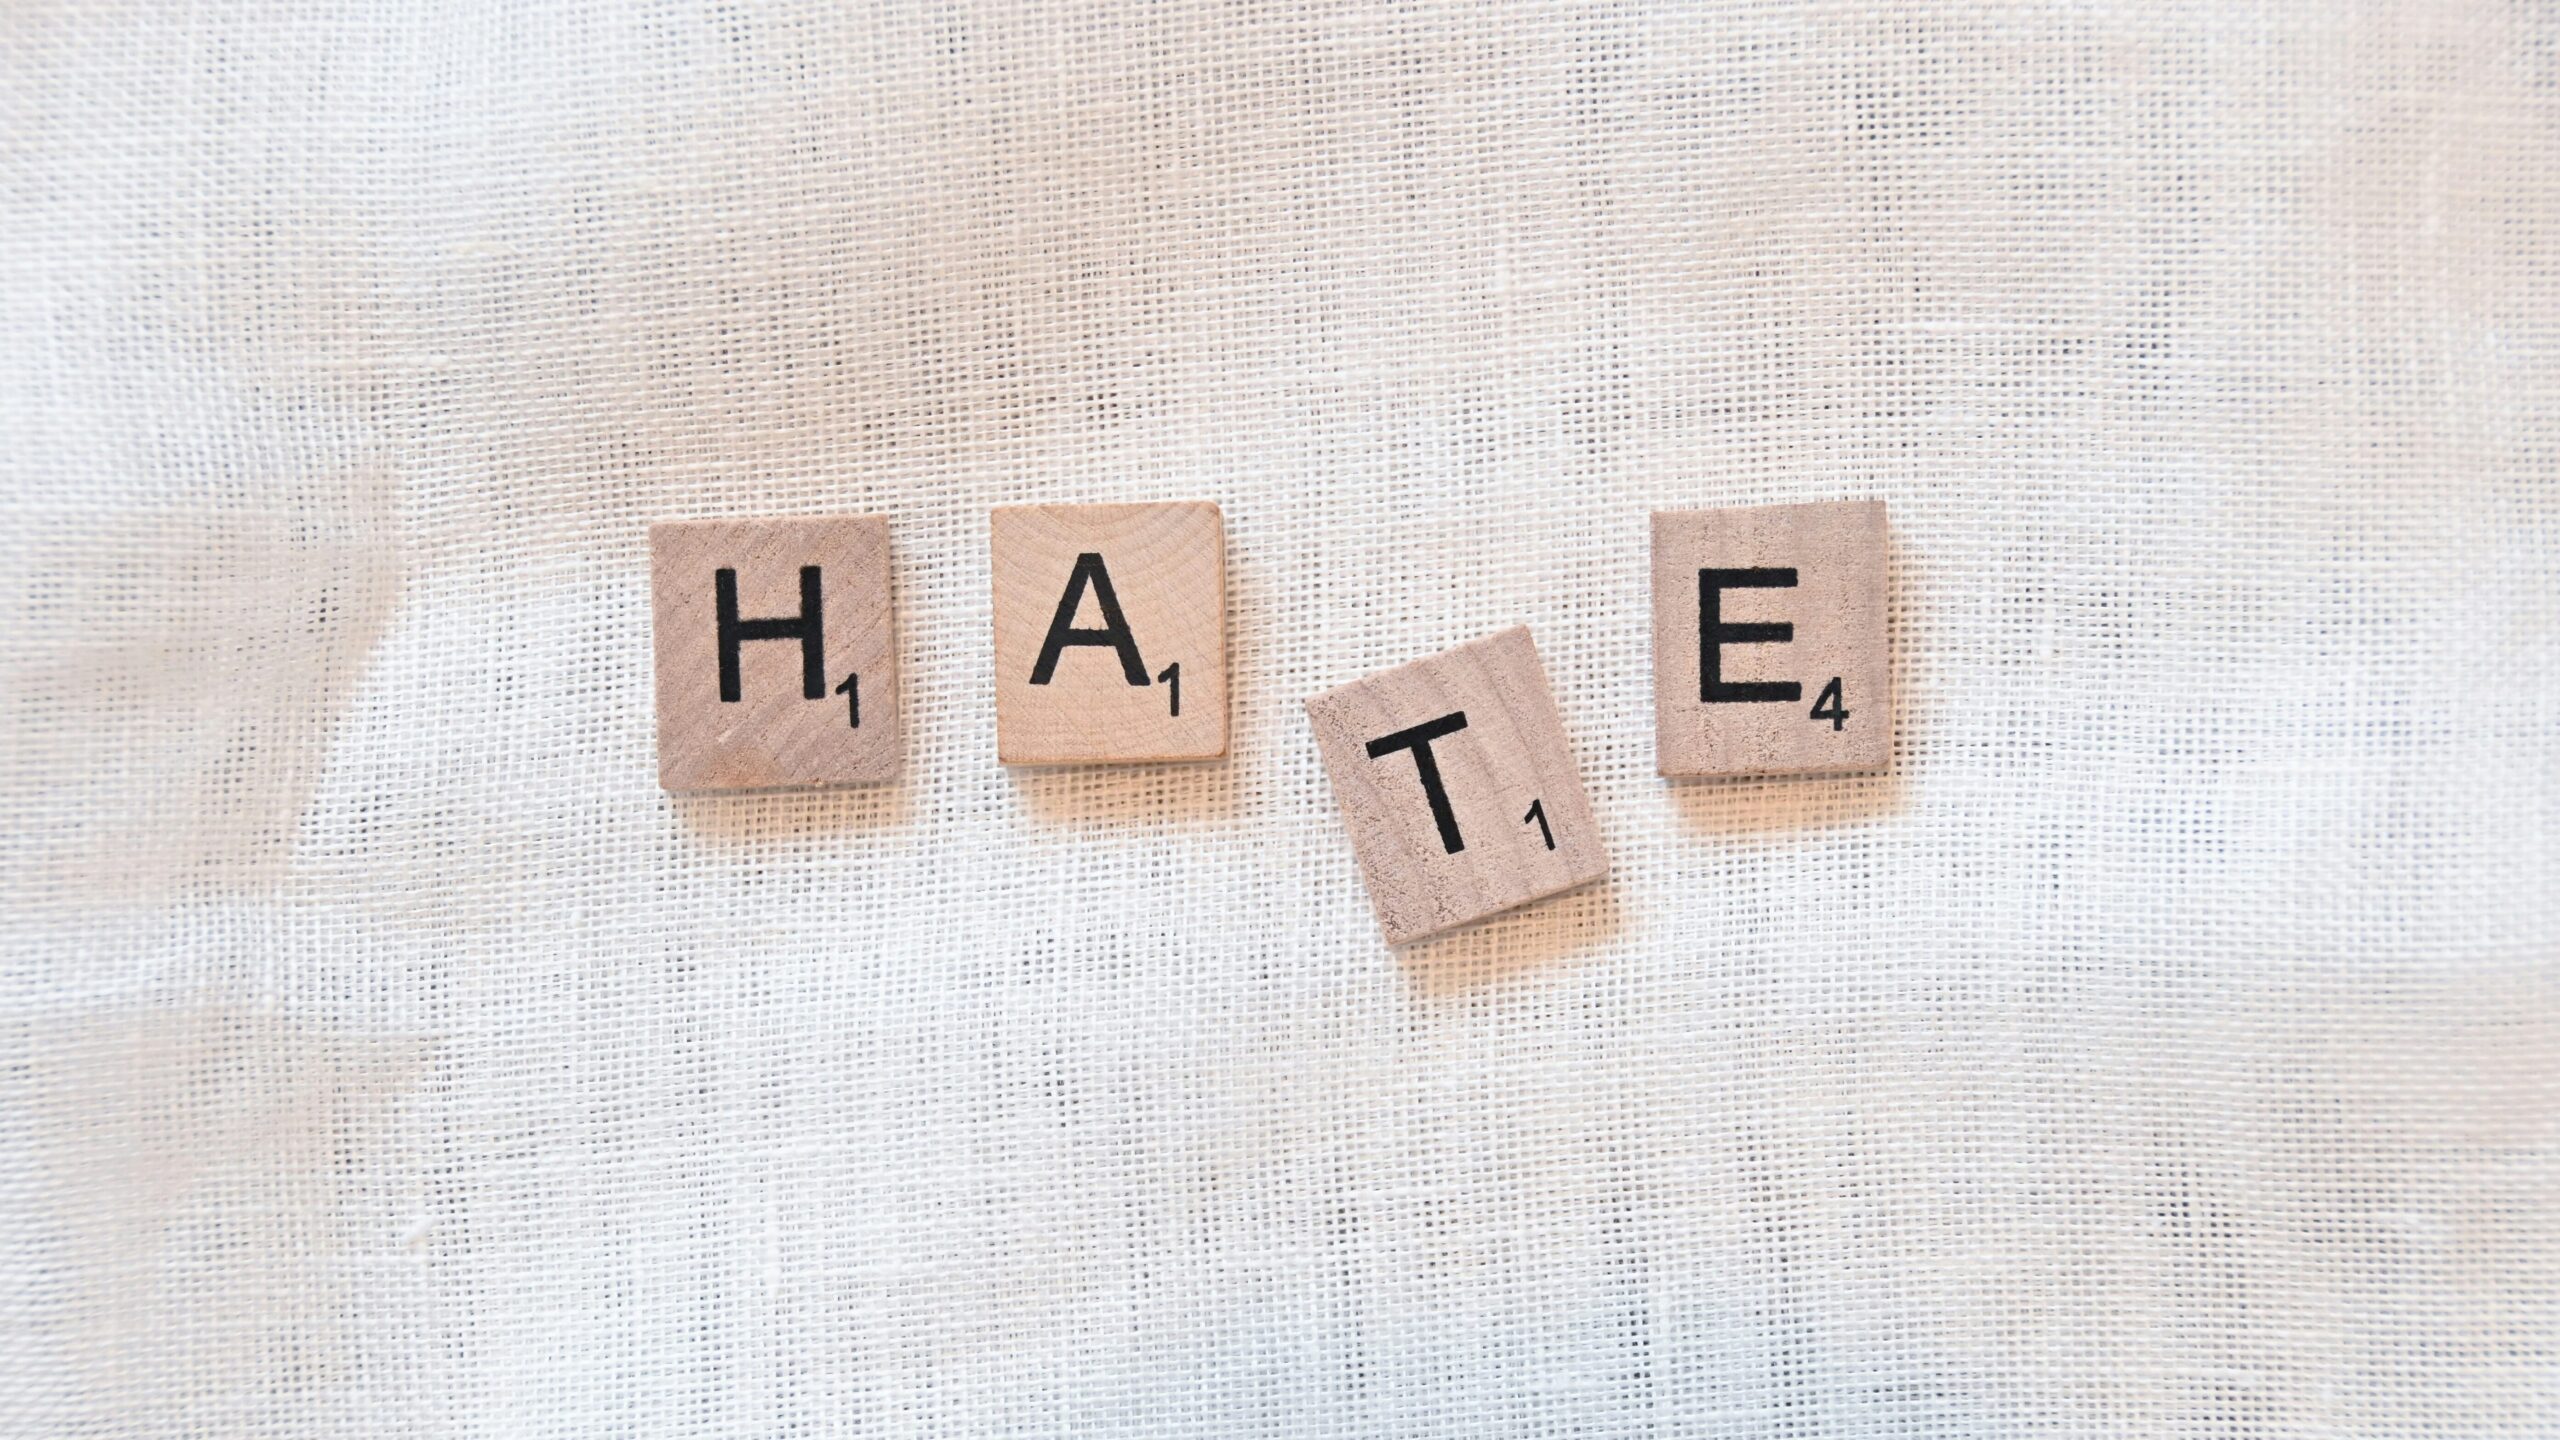 Image of hate spelled out in block letters: How can we overcome hatred?